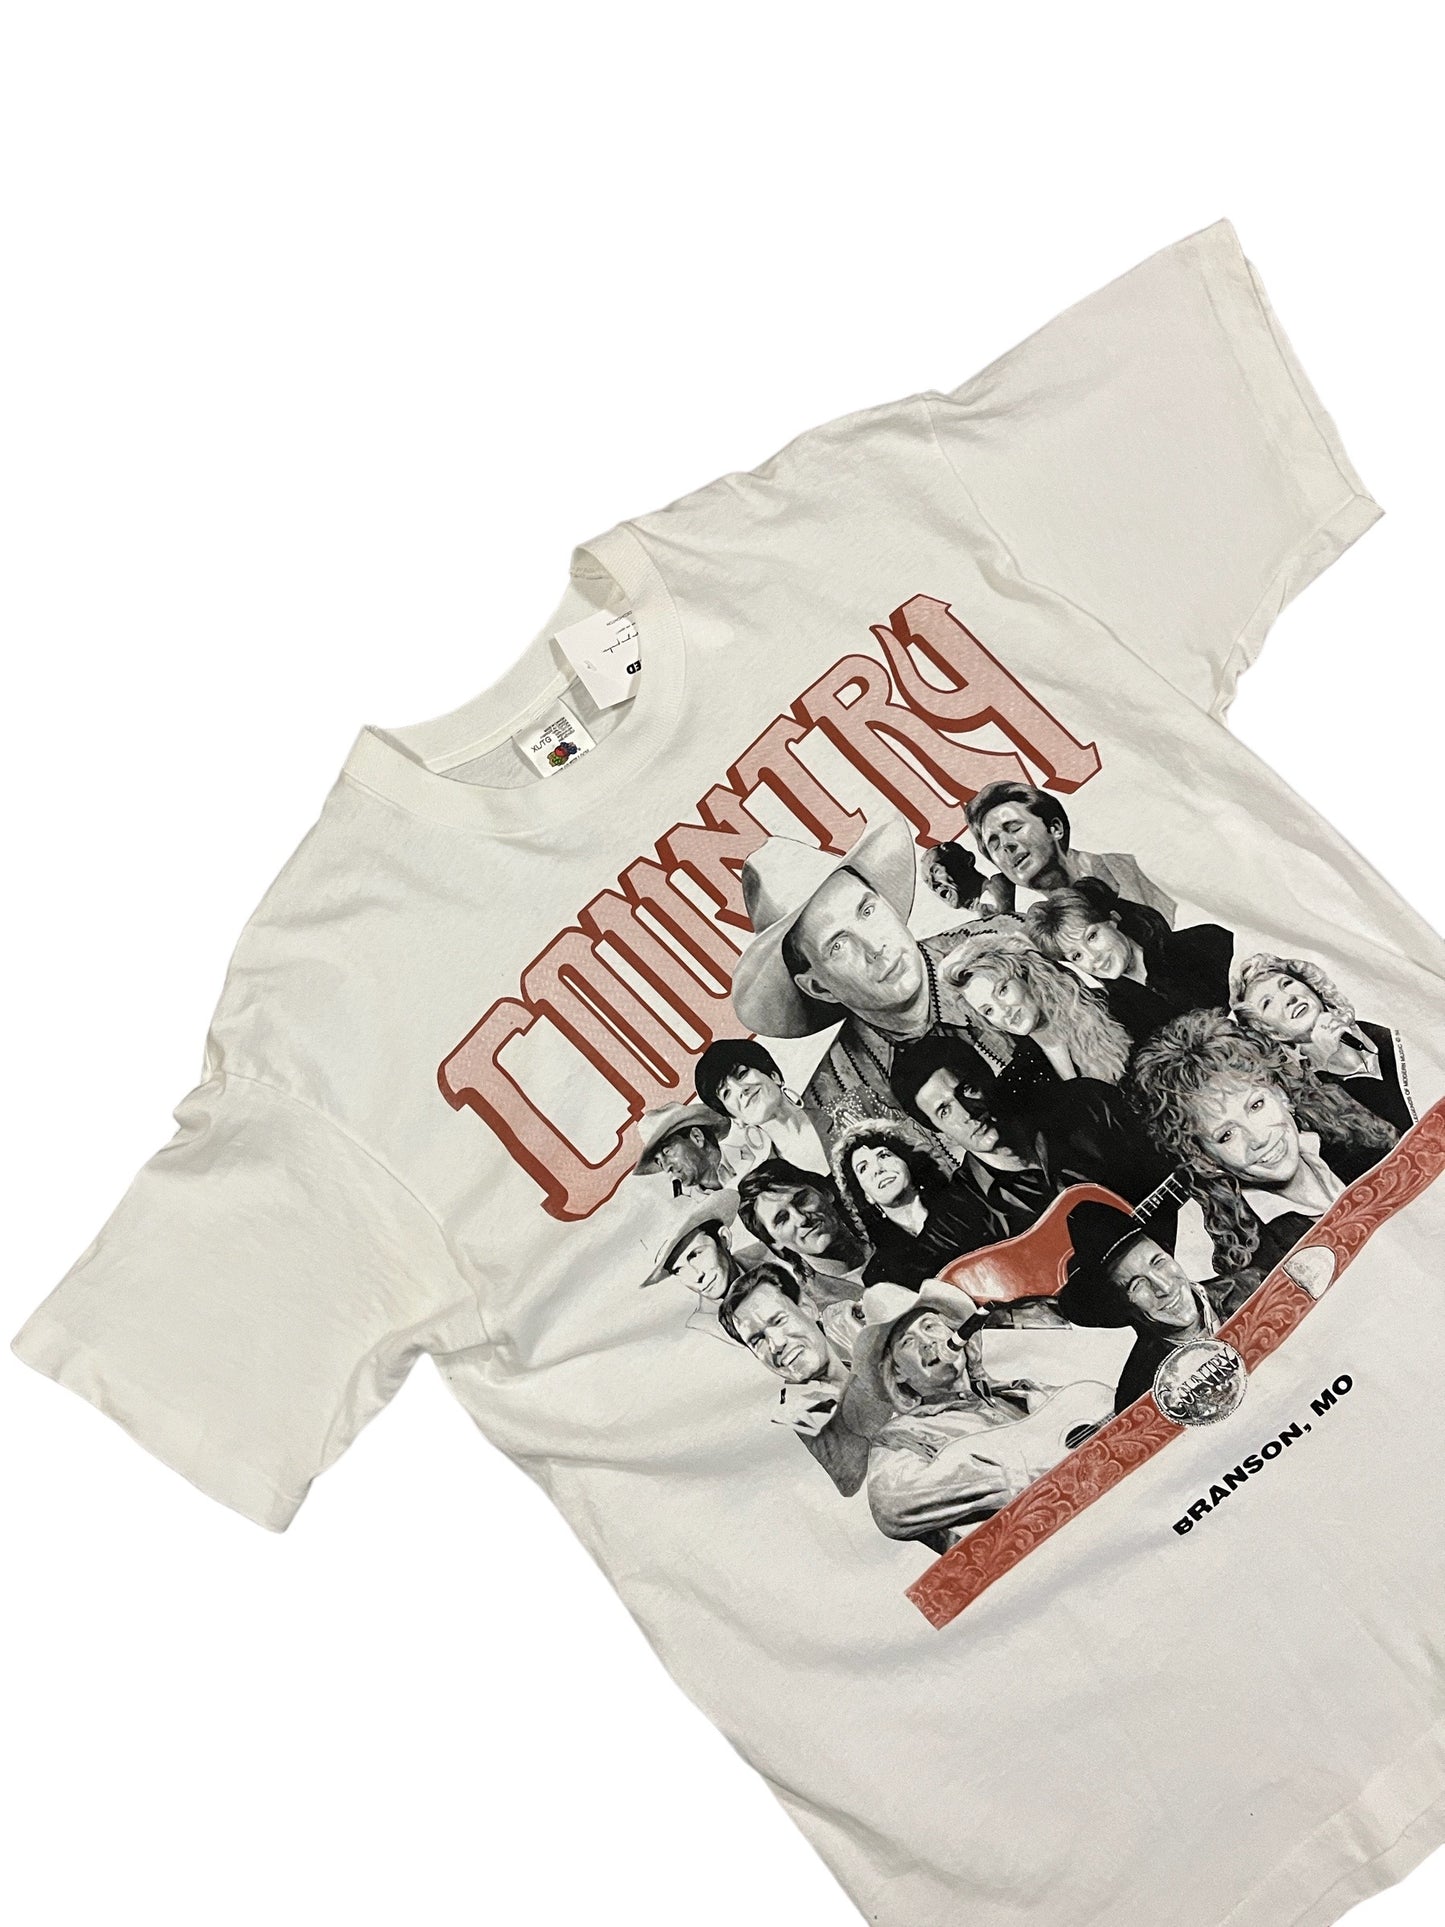 Vintage 90's Country Legends Of Modern Music Tee